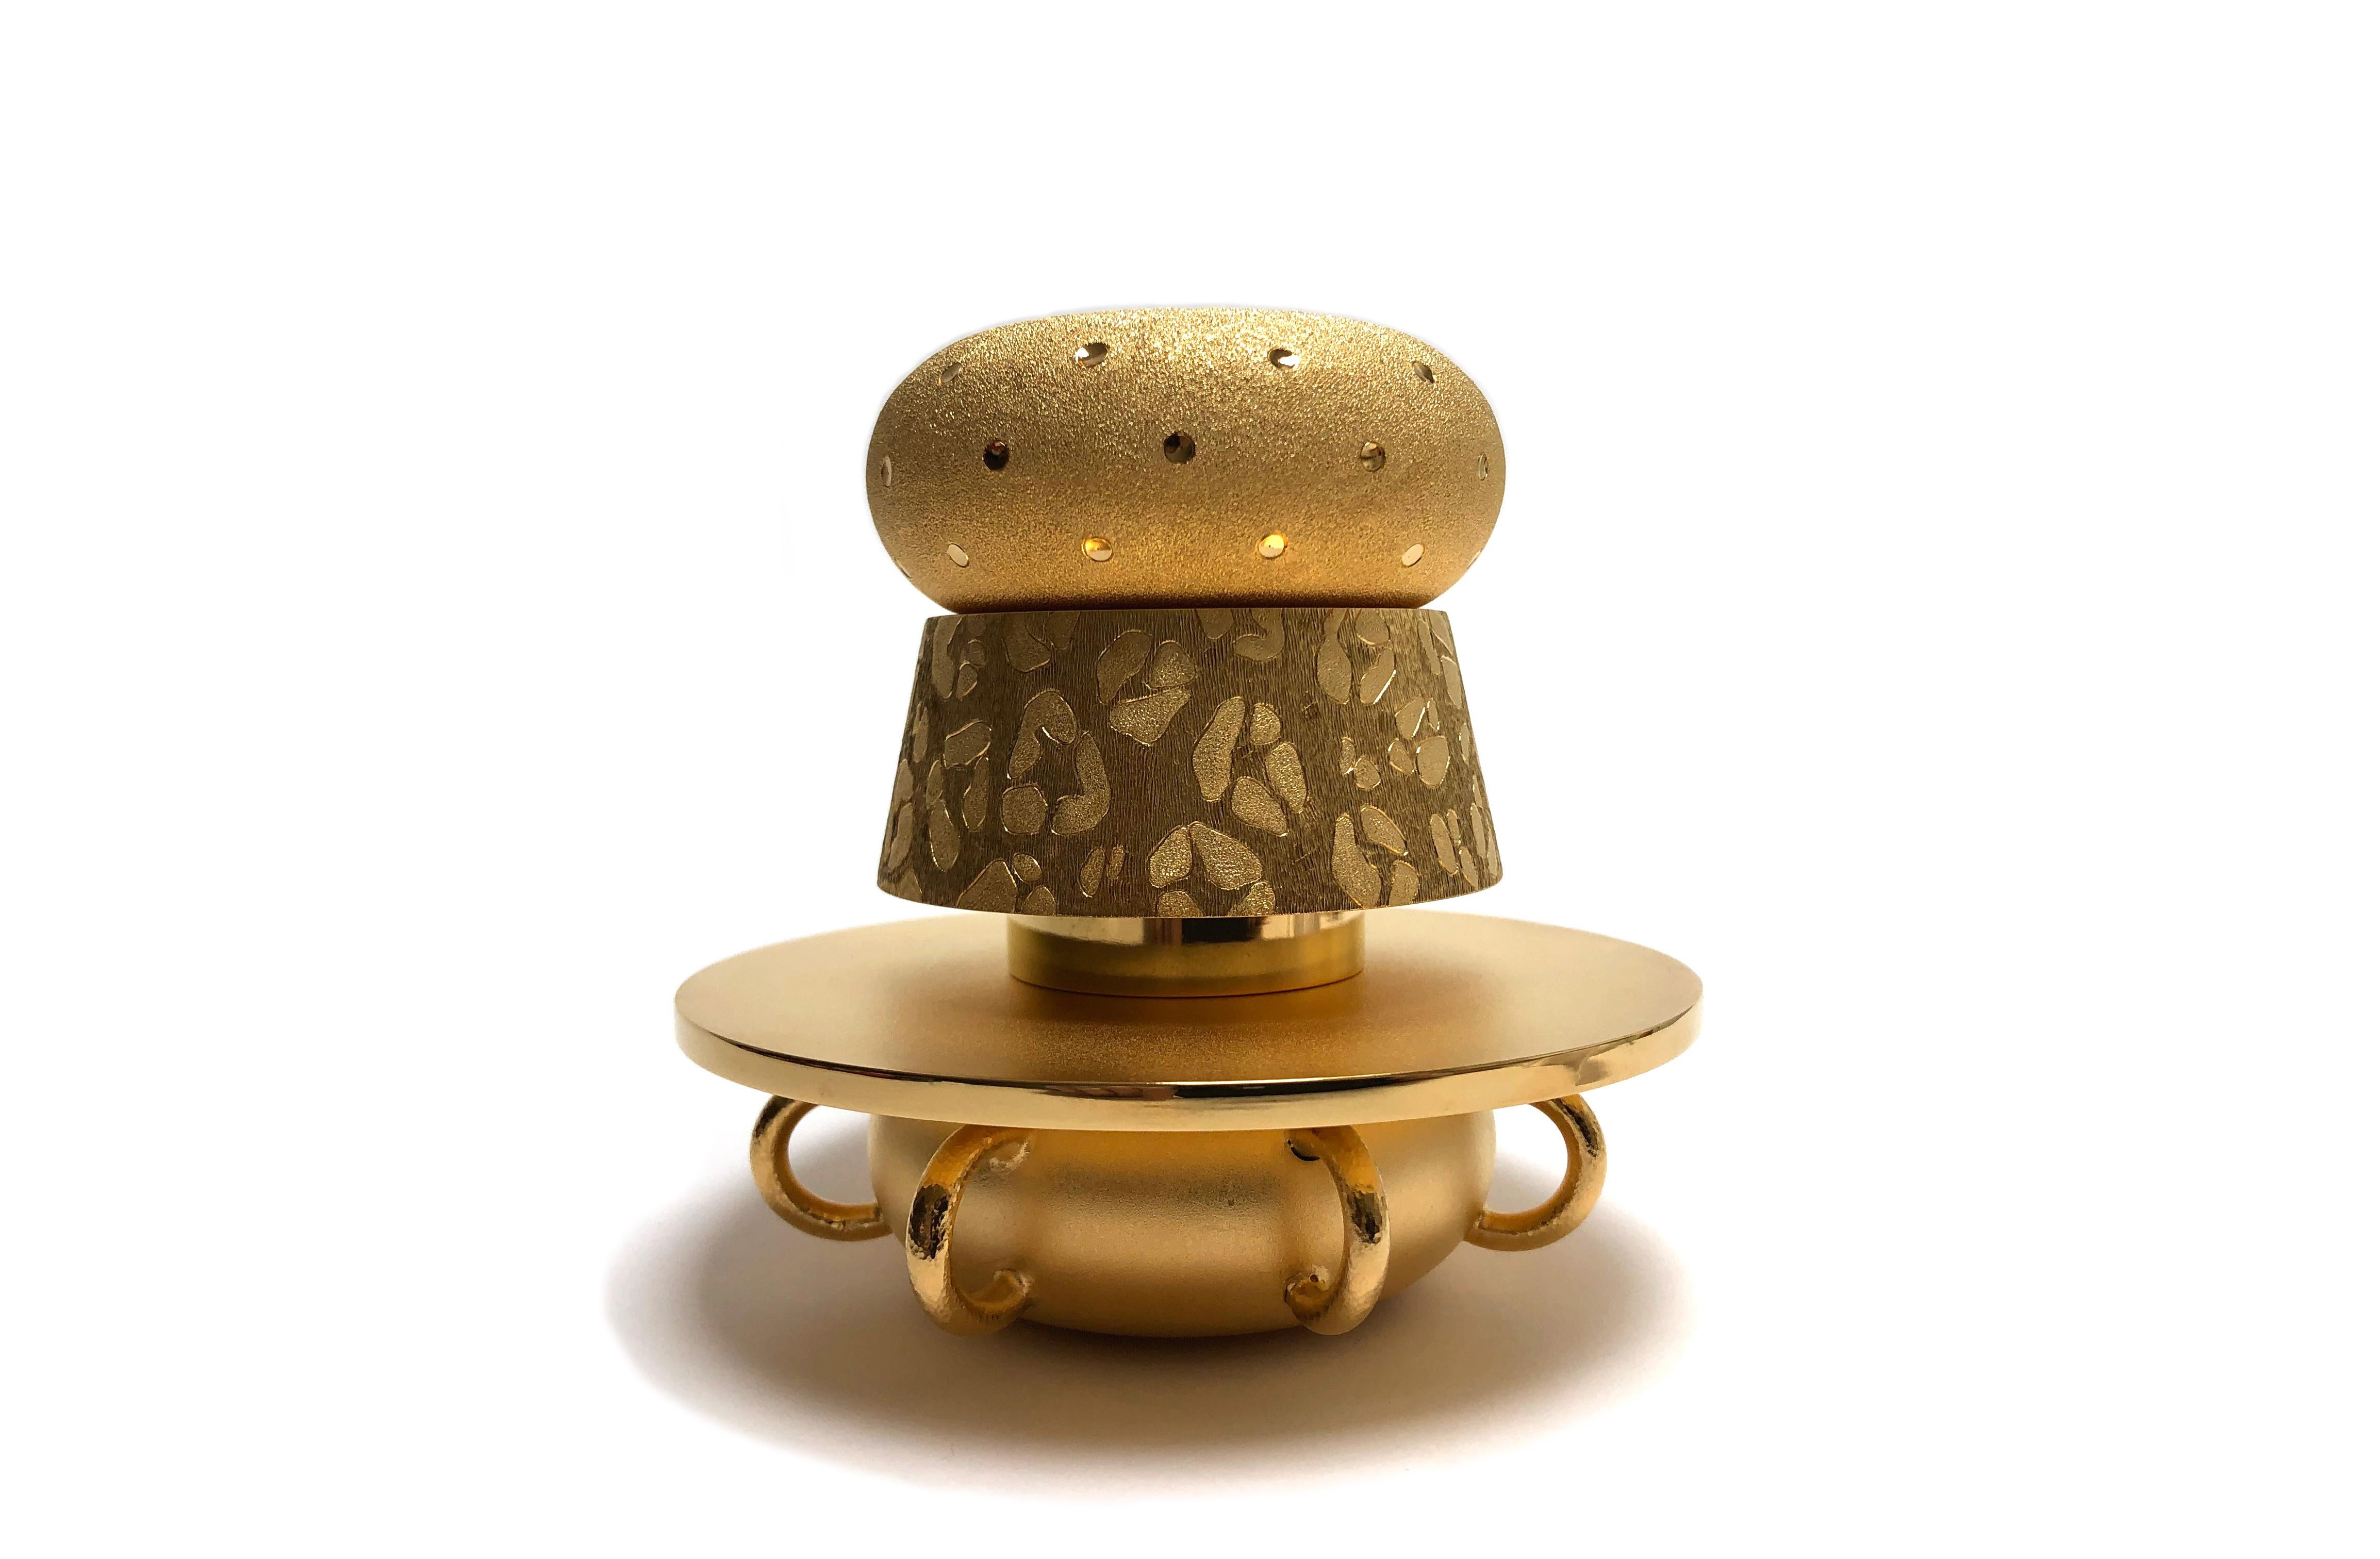  Gold-plated Candleholder Born to Be a Light, 